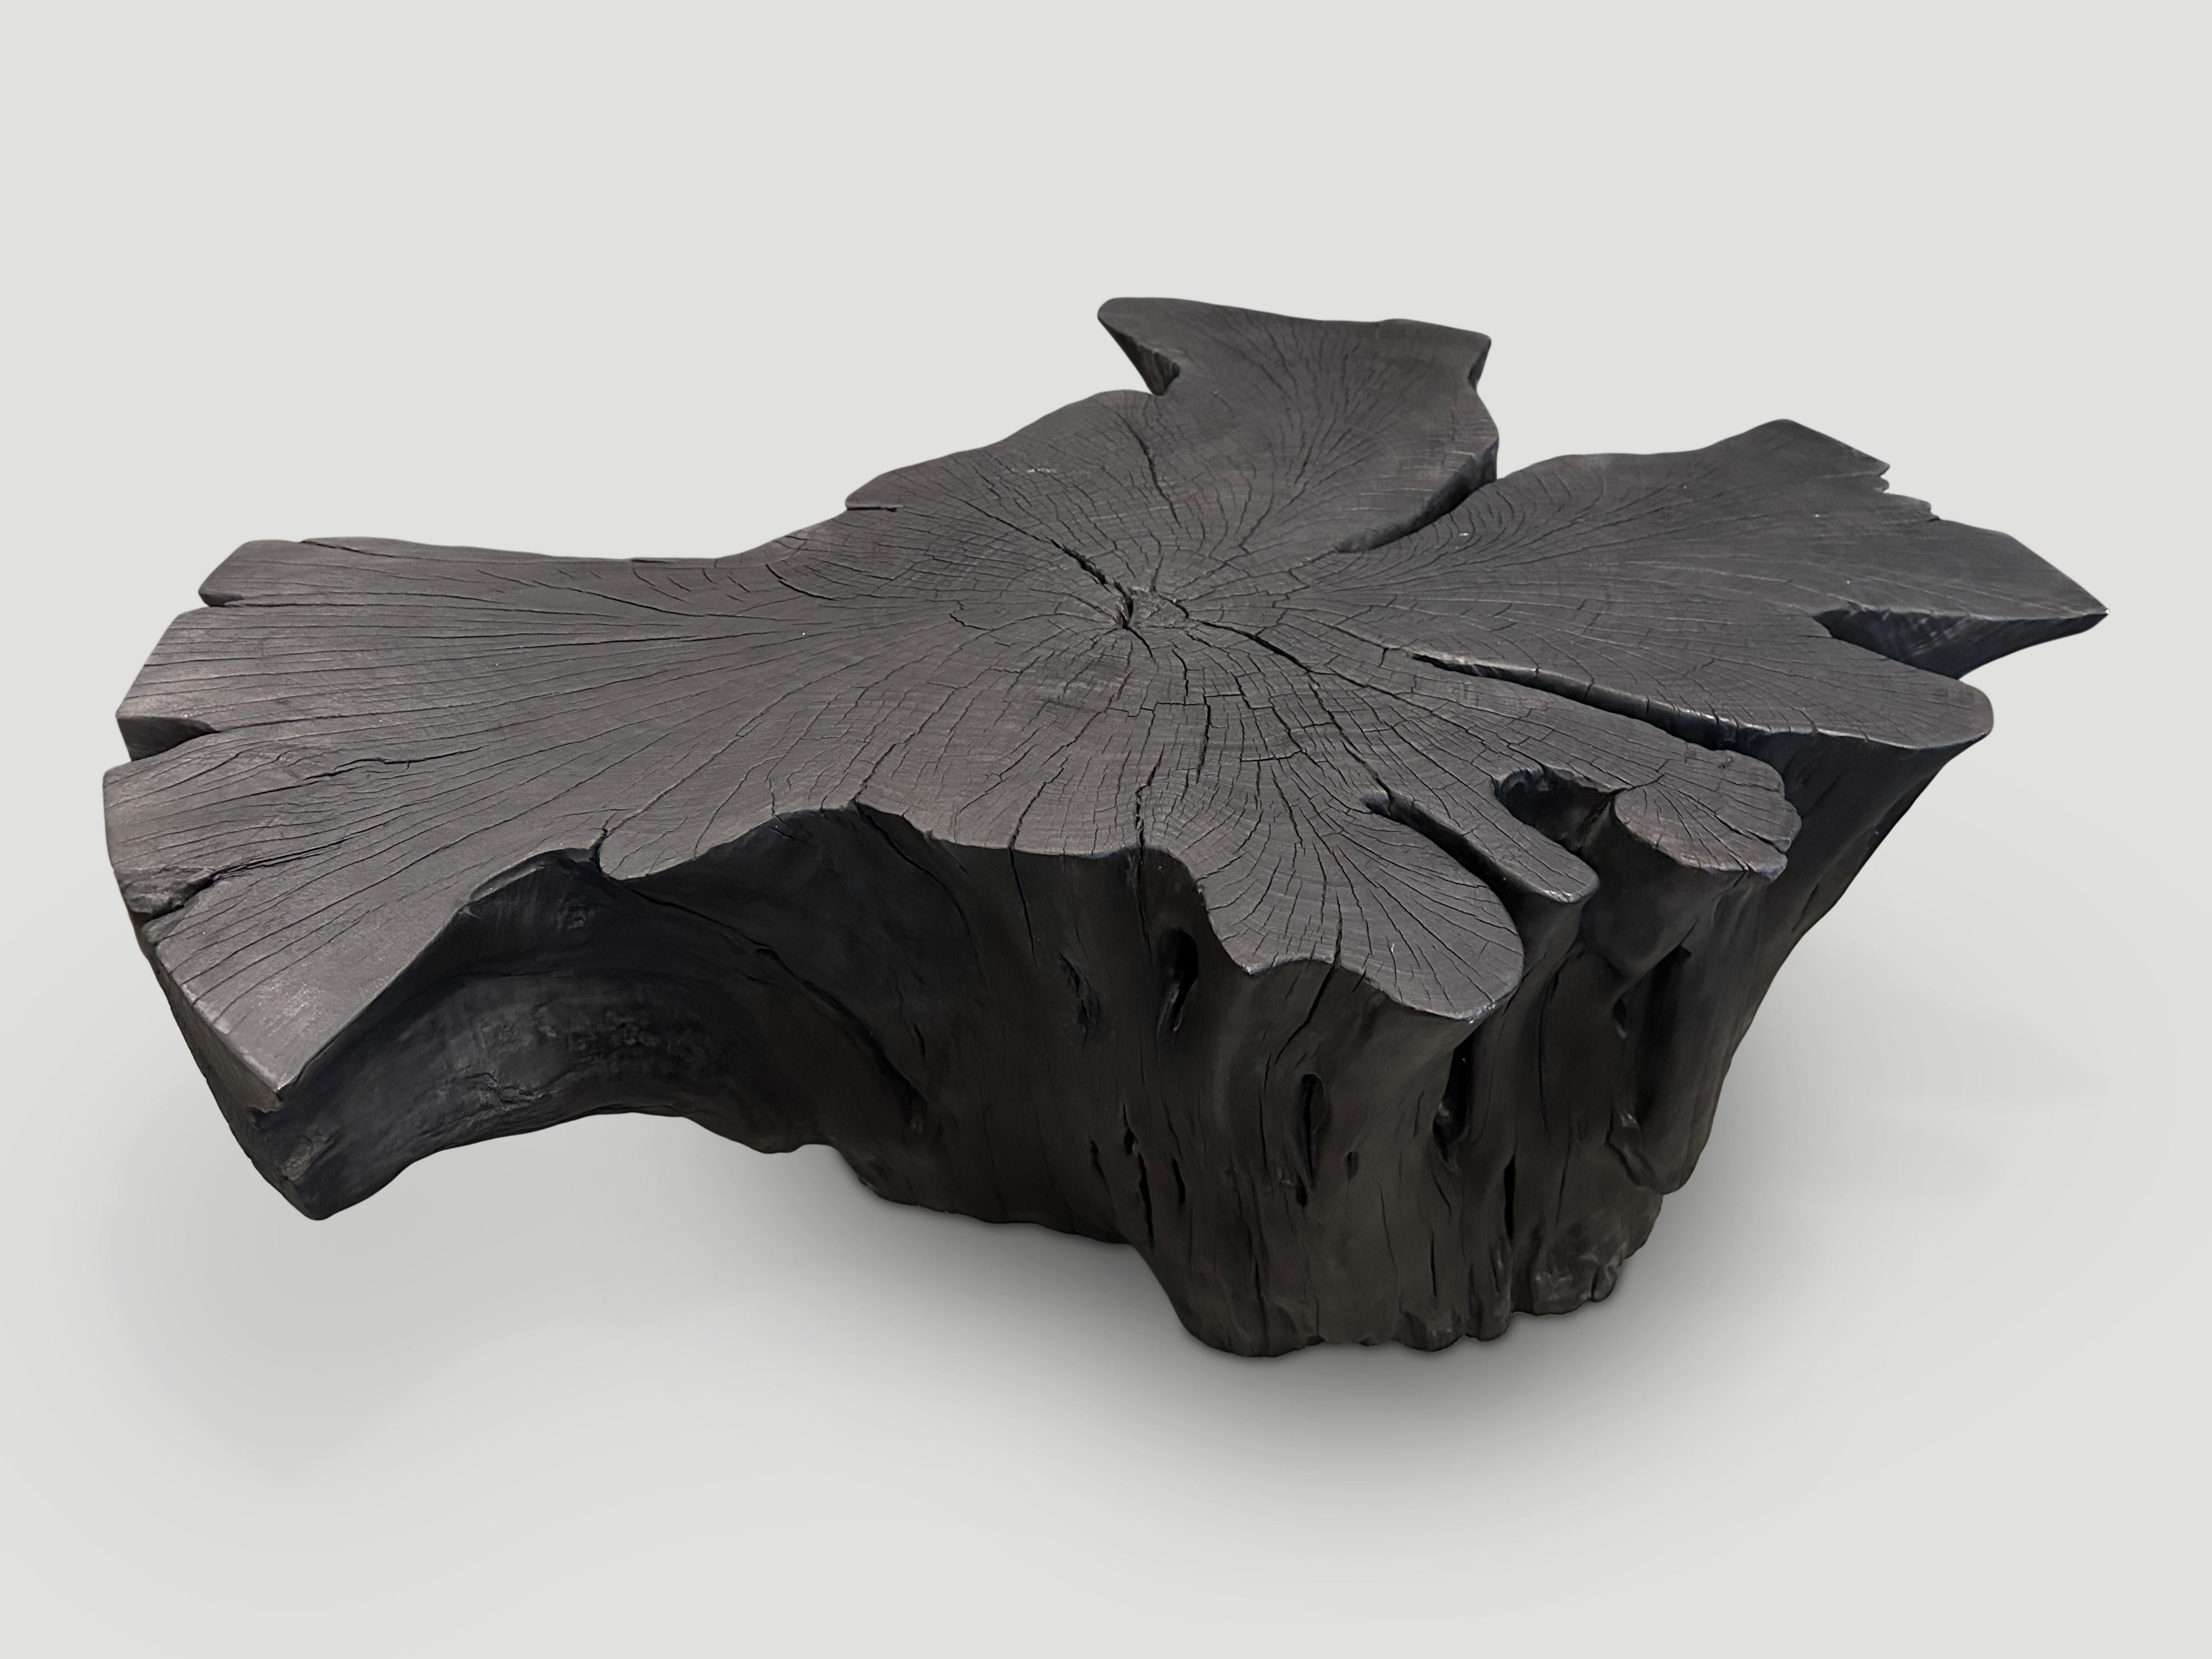 Beautiful butterfly shape on this impressive single rosewood root coffee table. Both usable and sculptural. Burnt, sanded and sealed revealing the beautiful wood grain.

The Triple Burnt Collection represents a unique line of modern furniture made